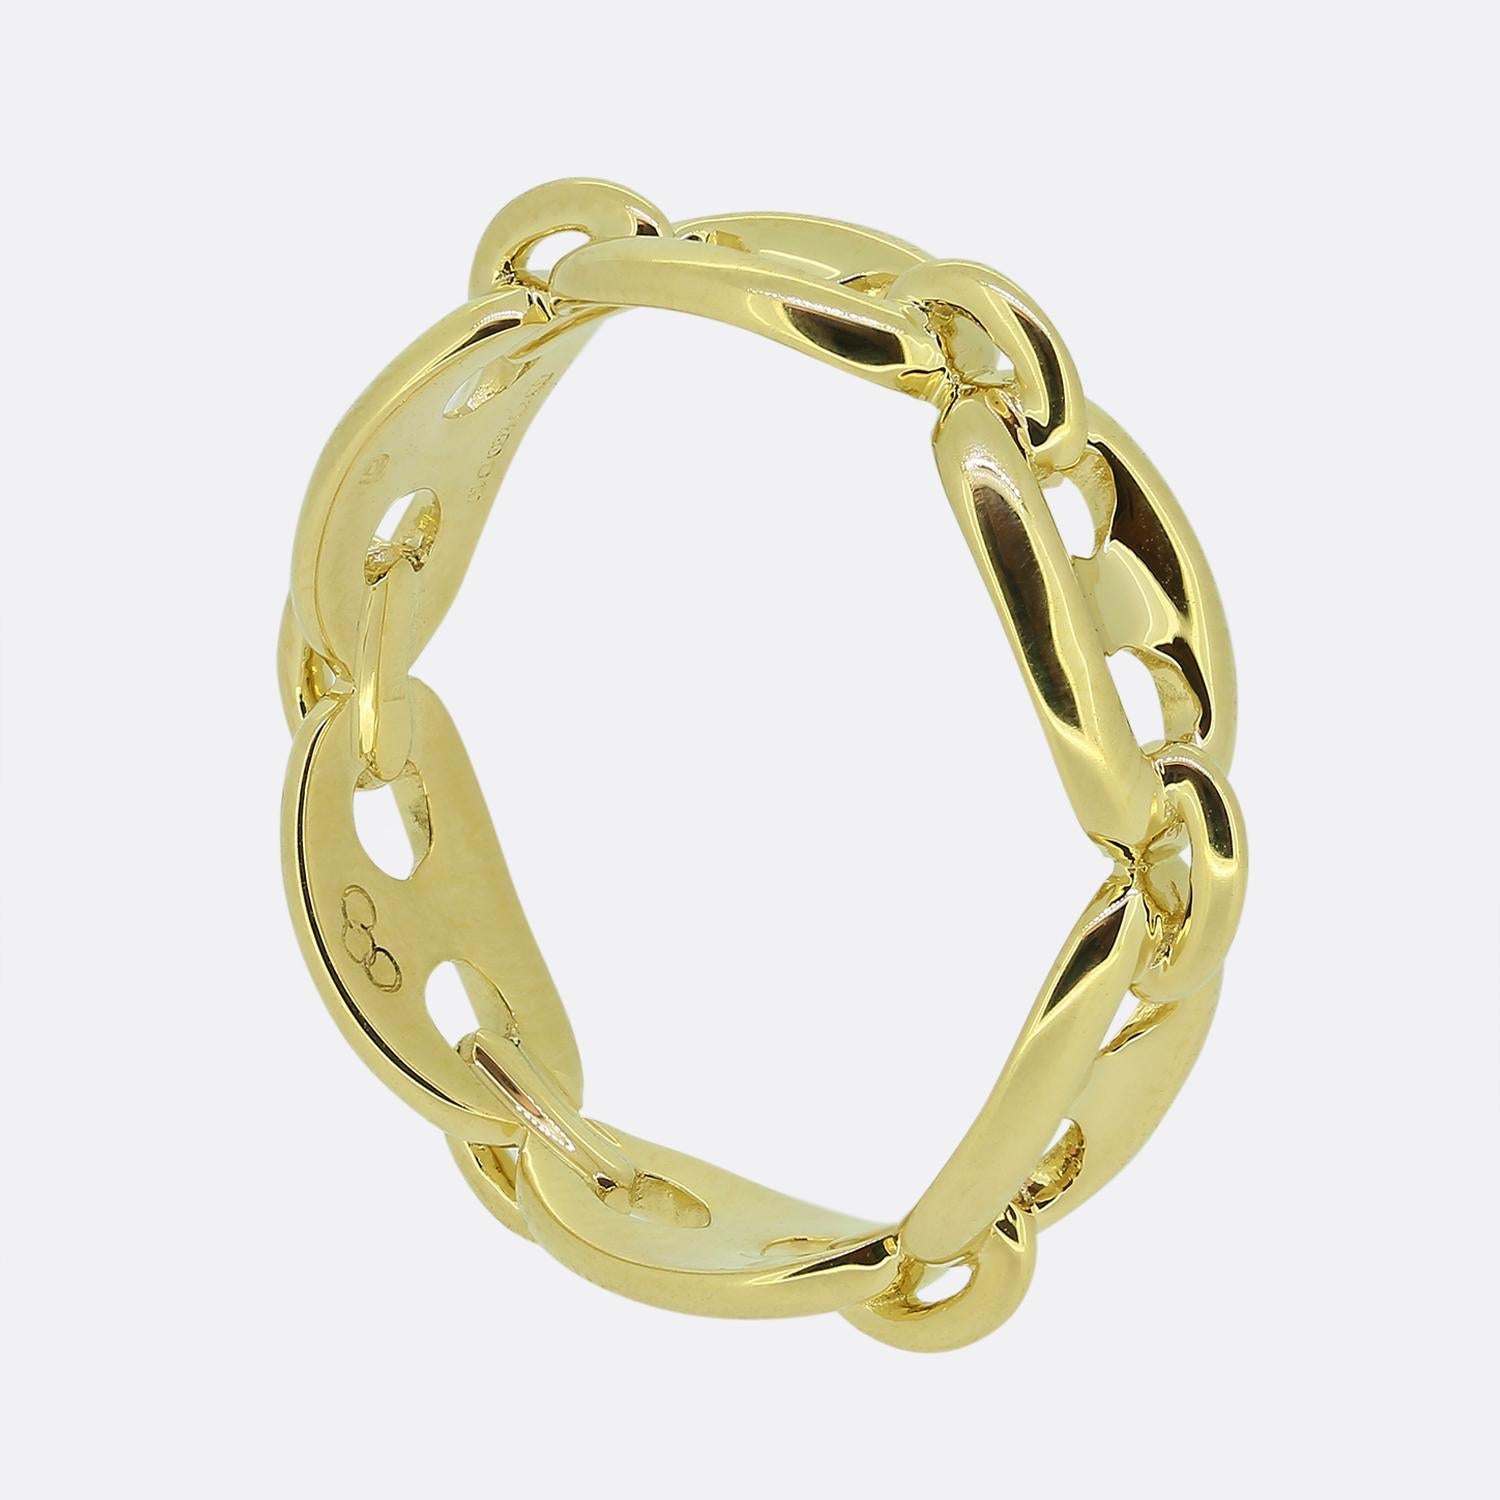 Here we have a wonderful band ring from the iconic (now retired) Links of London group. This piece has been crafted from 18ct yellow gold and replicates the mariner or gucci style link chains which feature open interlocking links in a puffed out